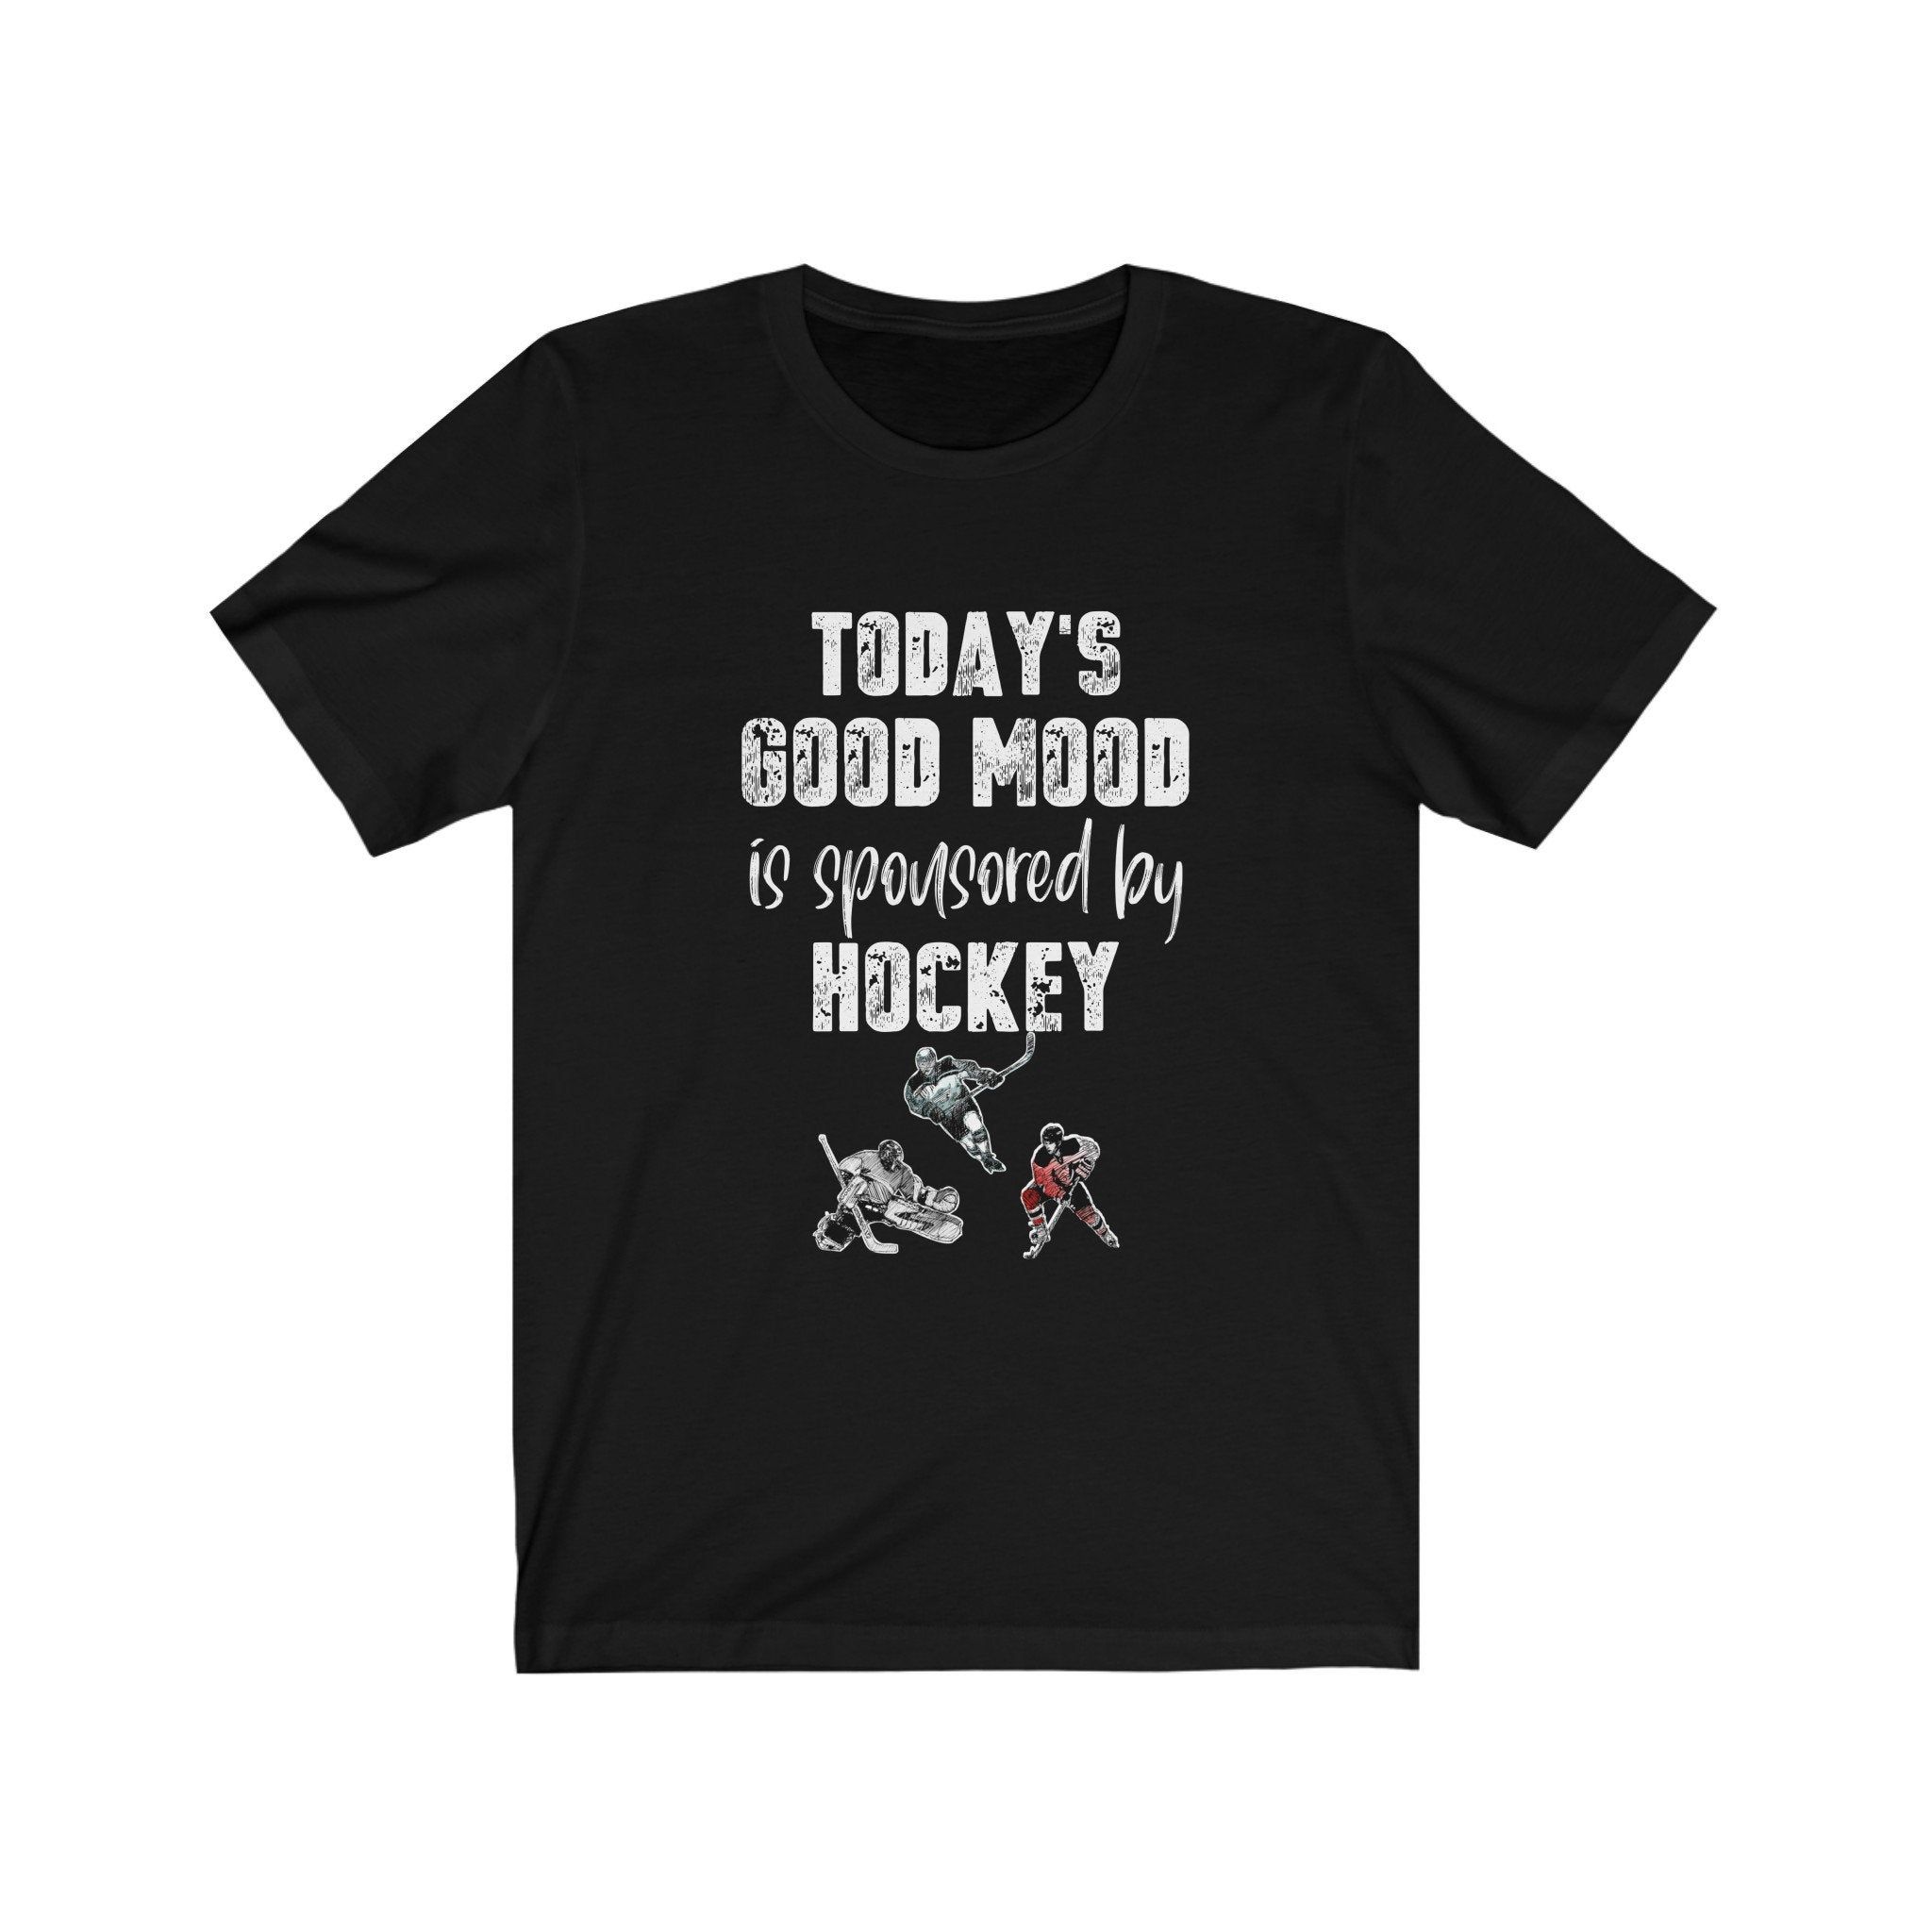 Hockey Shirt Today’s Good Mood Is Sponsored By Hockey T-Shirt Vintage Retro Distressed Hockey Players Gift for Men and Women